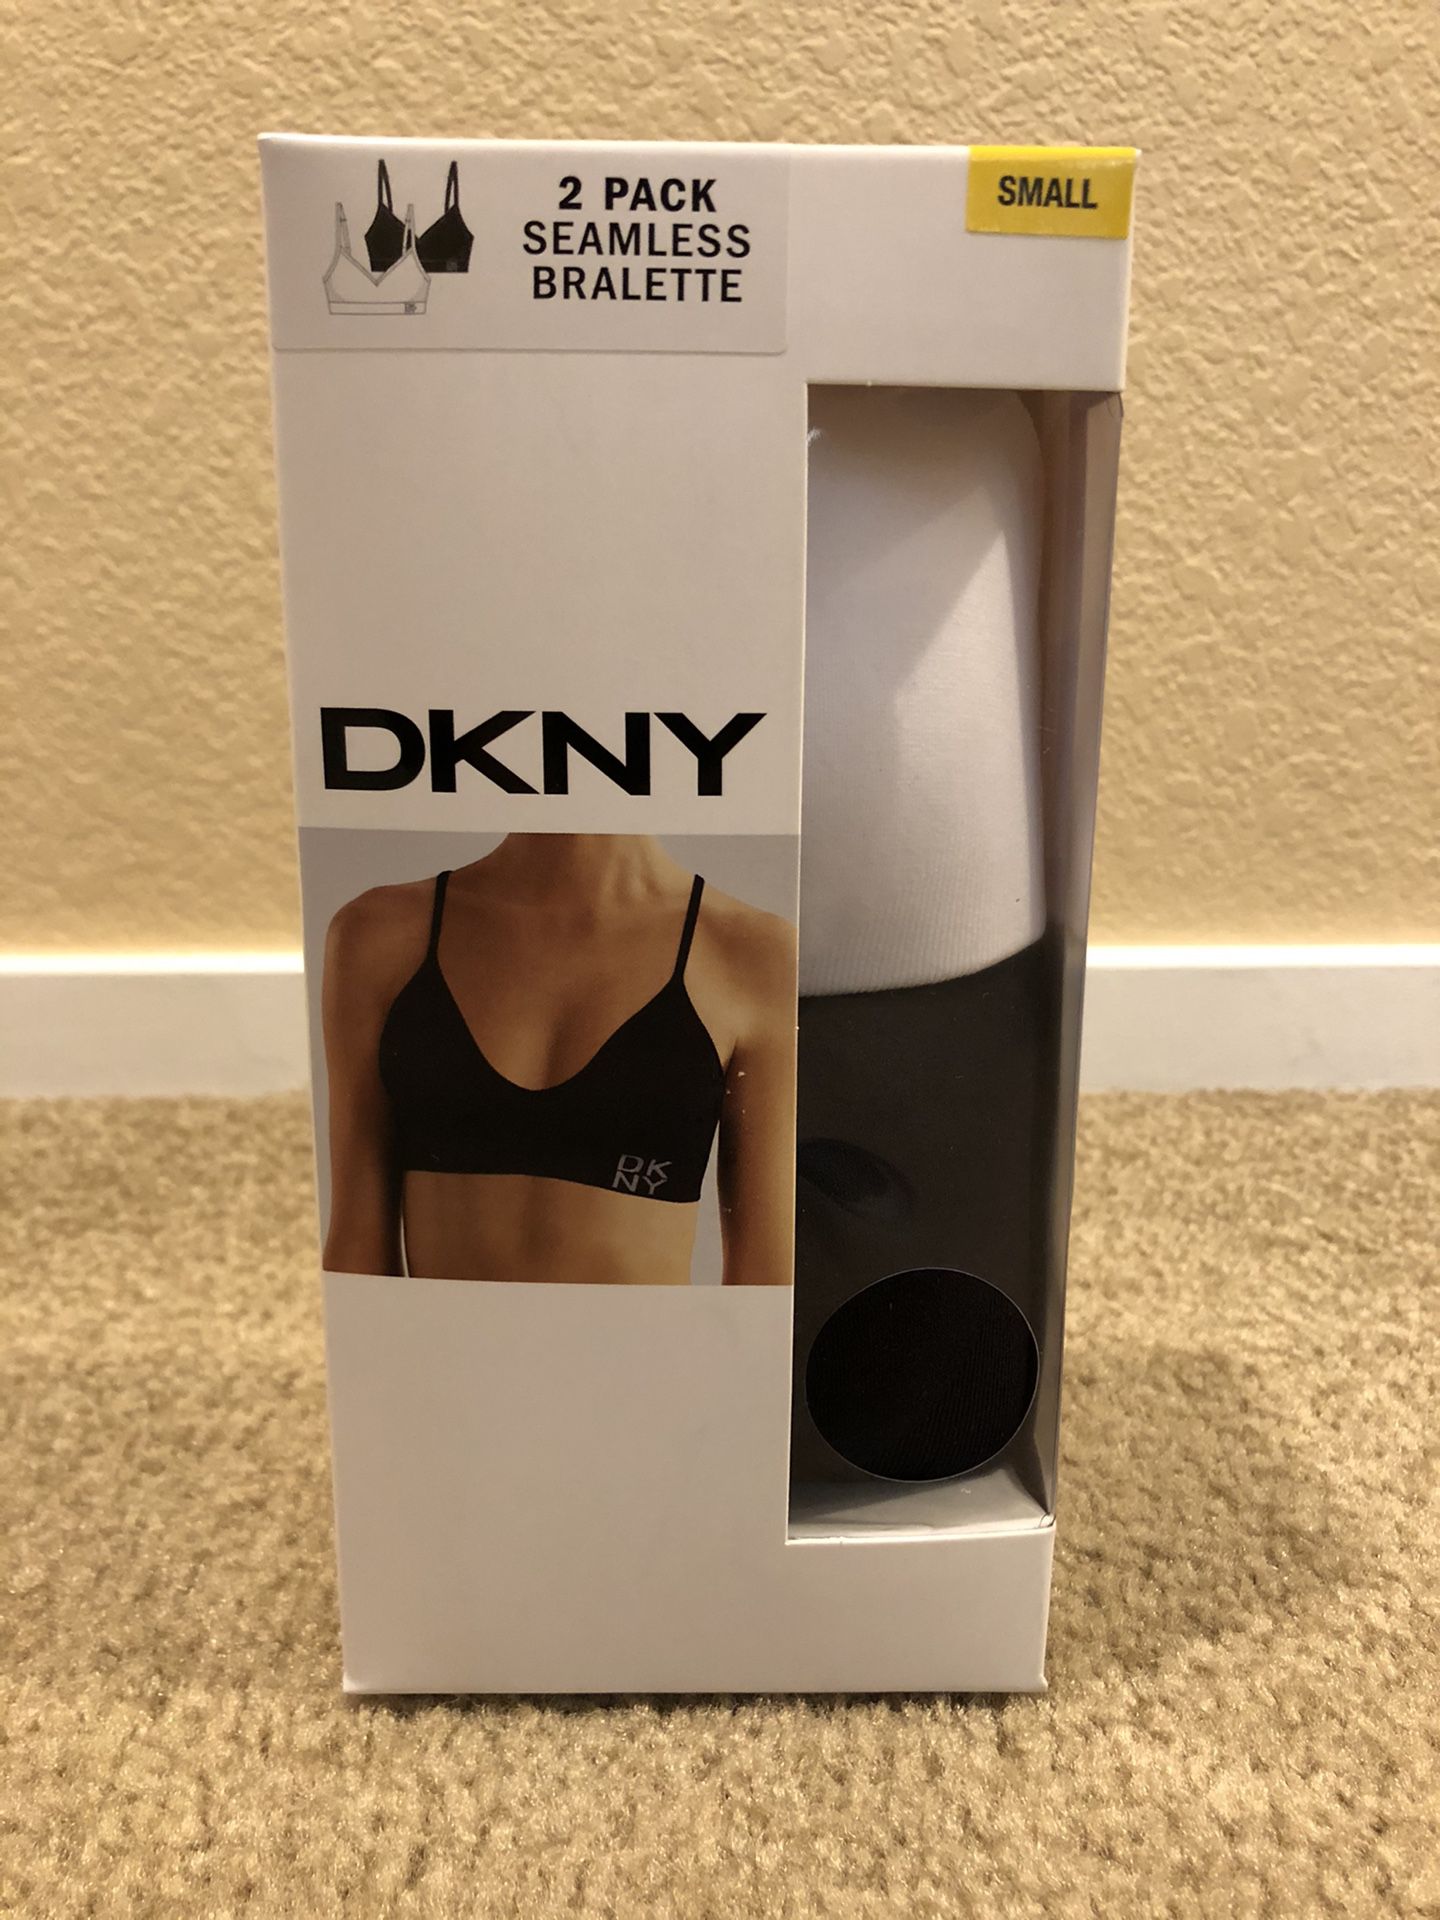 DKNY Seamless Bralette (Small)- 2 Pack *New Sealed In Box* for Sale in Las  Vegas, NV - OfferUp